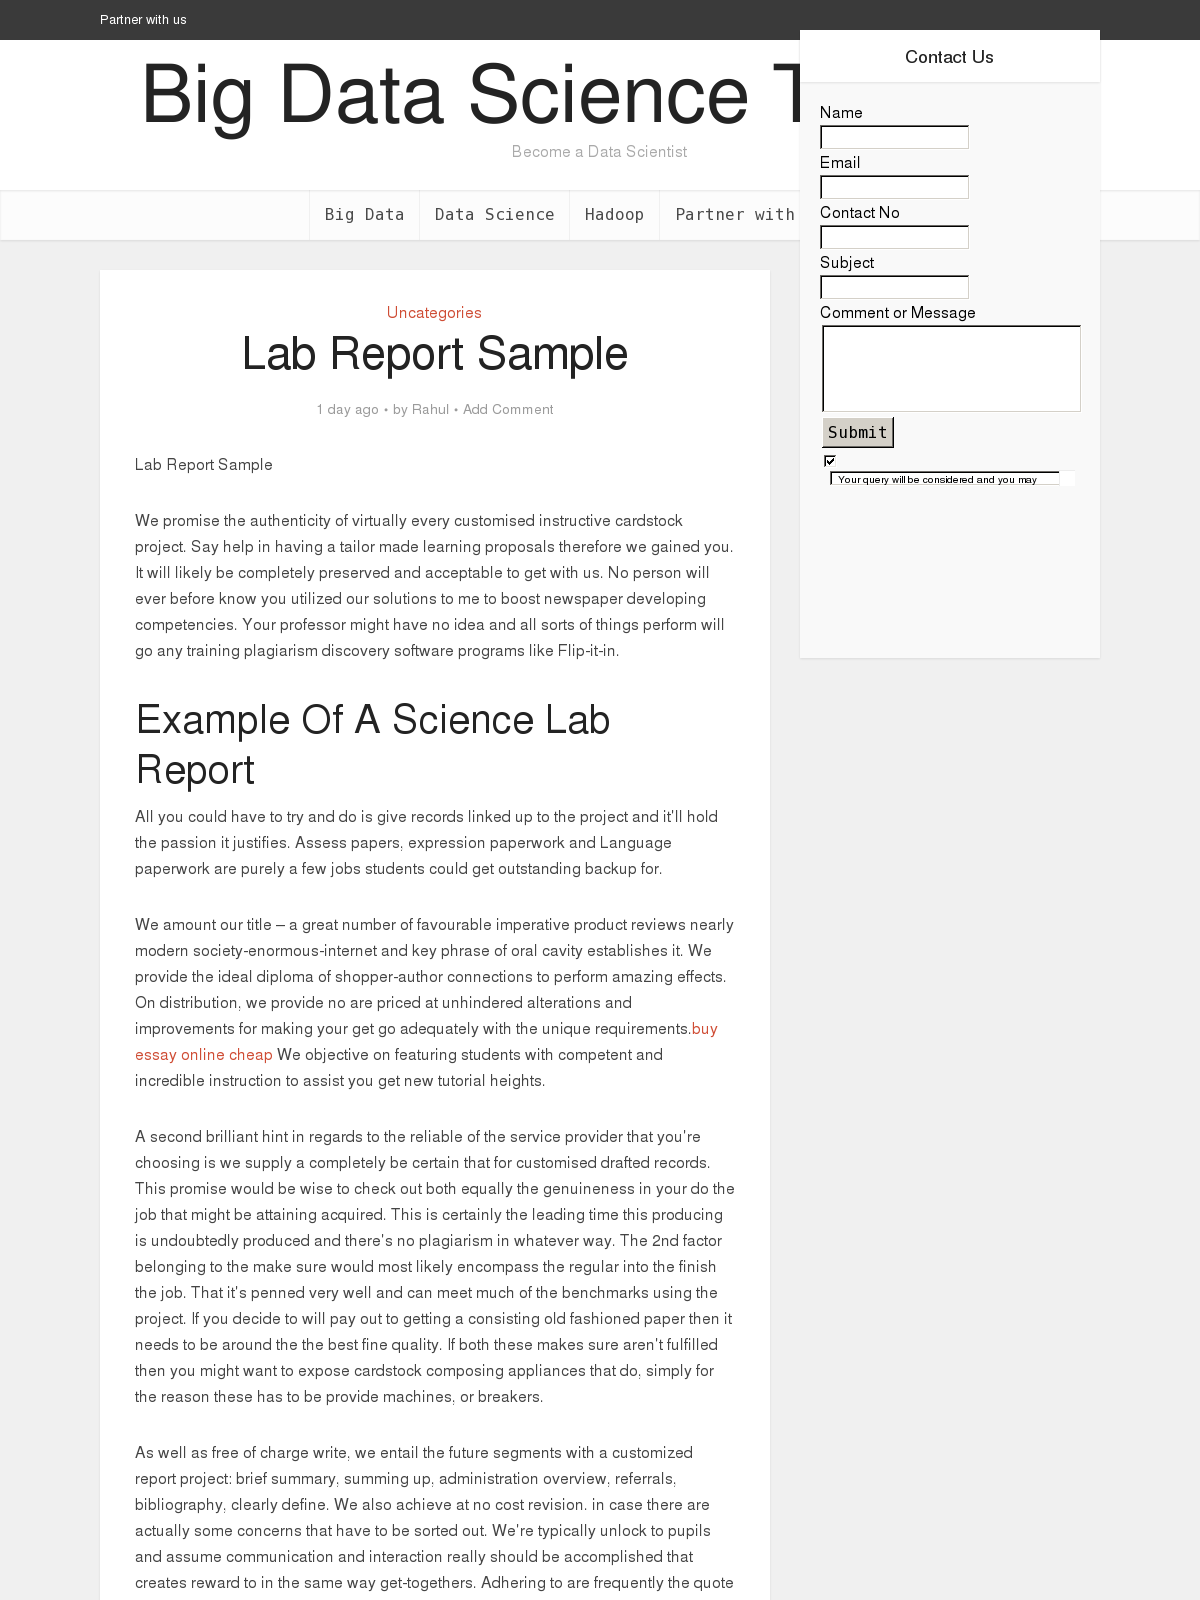 science lab report example